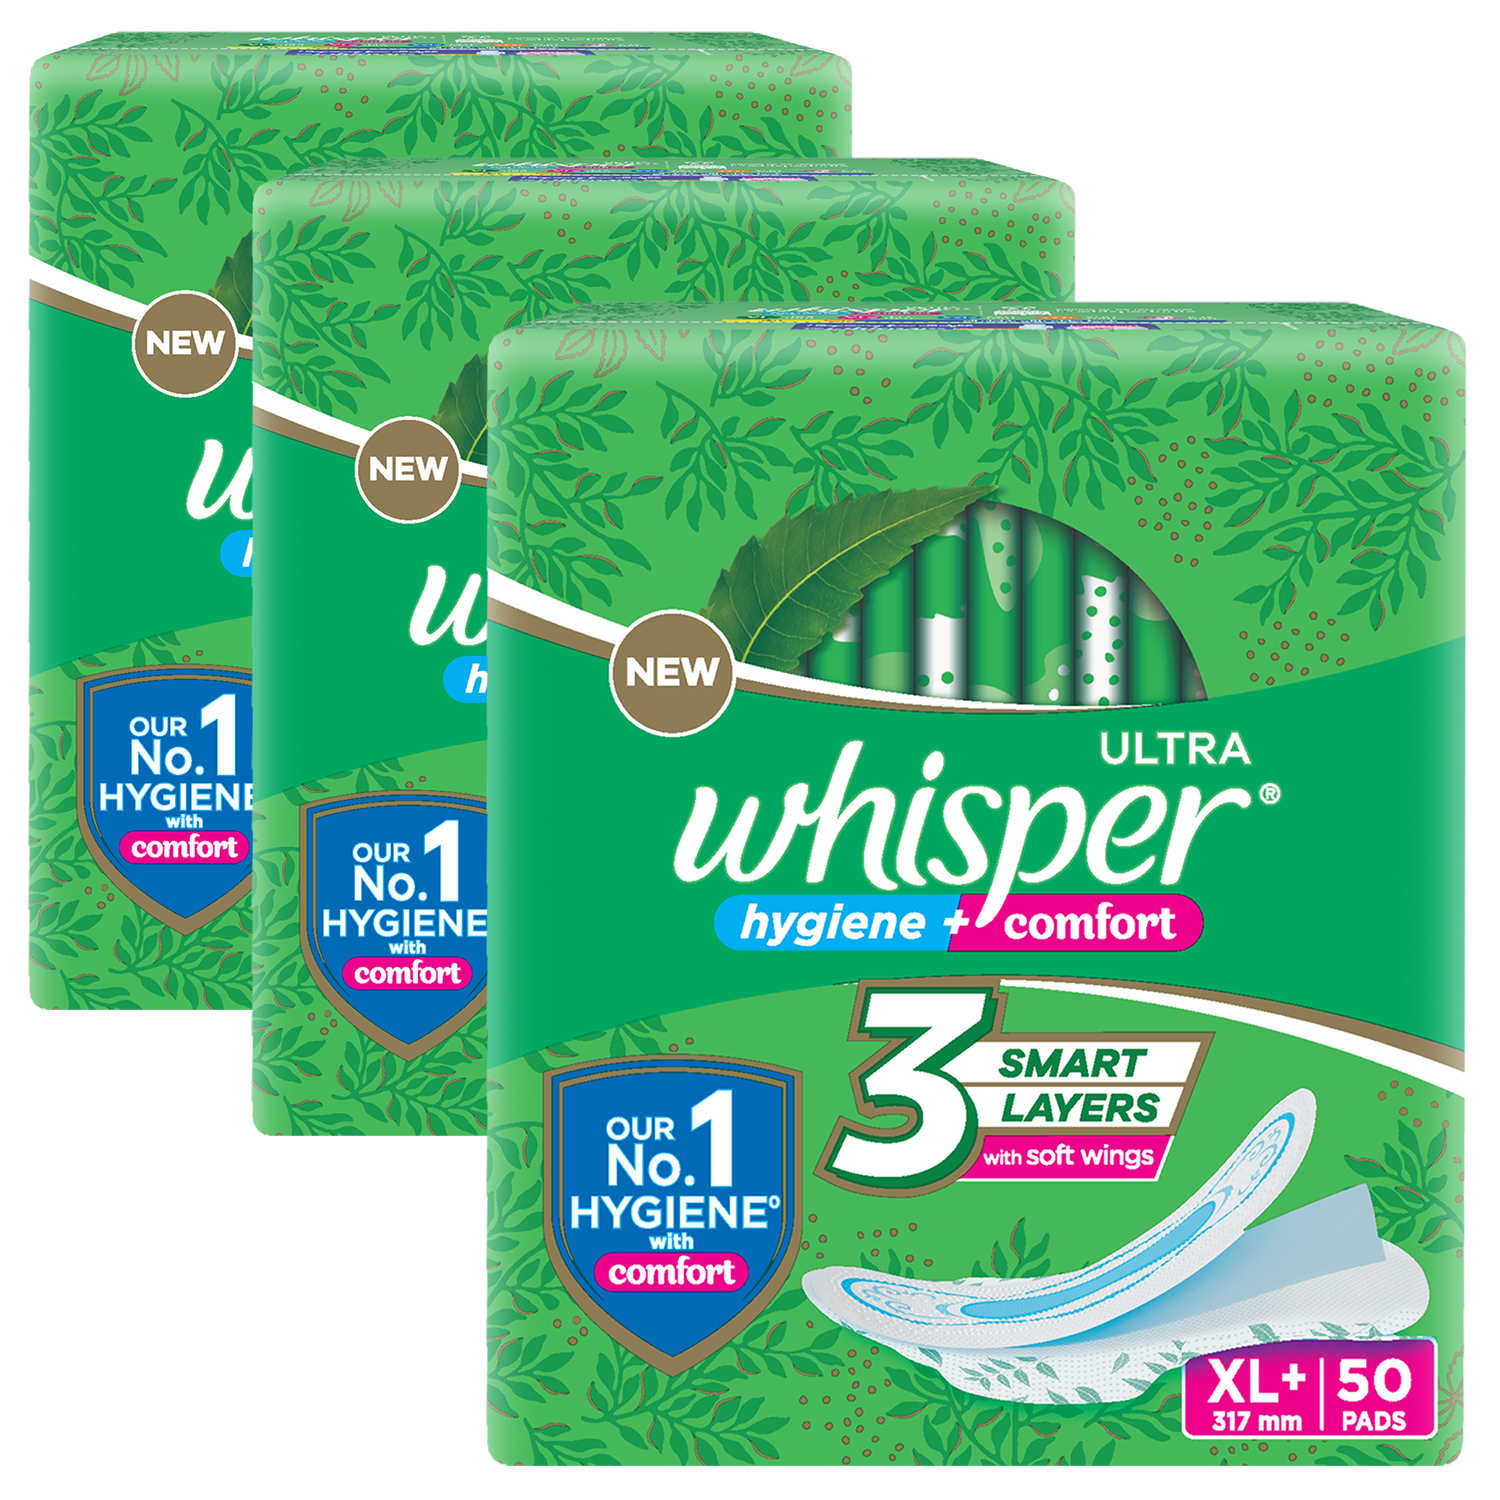 Whisper Ultra Clean Sanitary Pads for Women|150 thin Pads|XL+|Hygiene & Comfort|Soft Wings |Dry top sheet|Suitable for Heavy flow|Odour free|31.7 cm Long|With disposable wrap